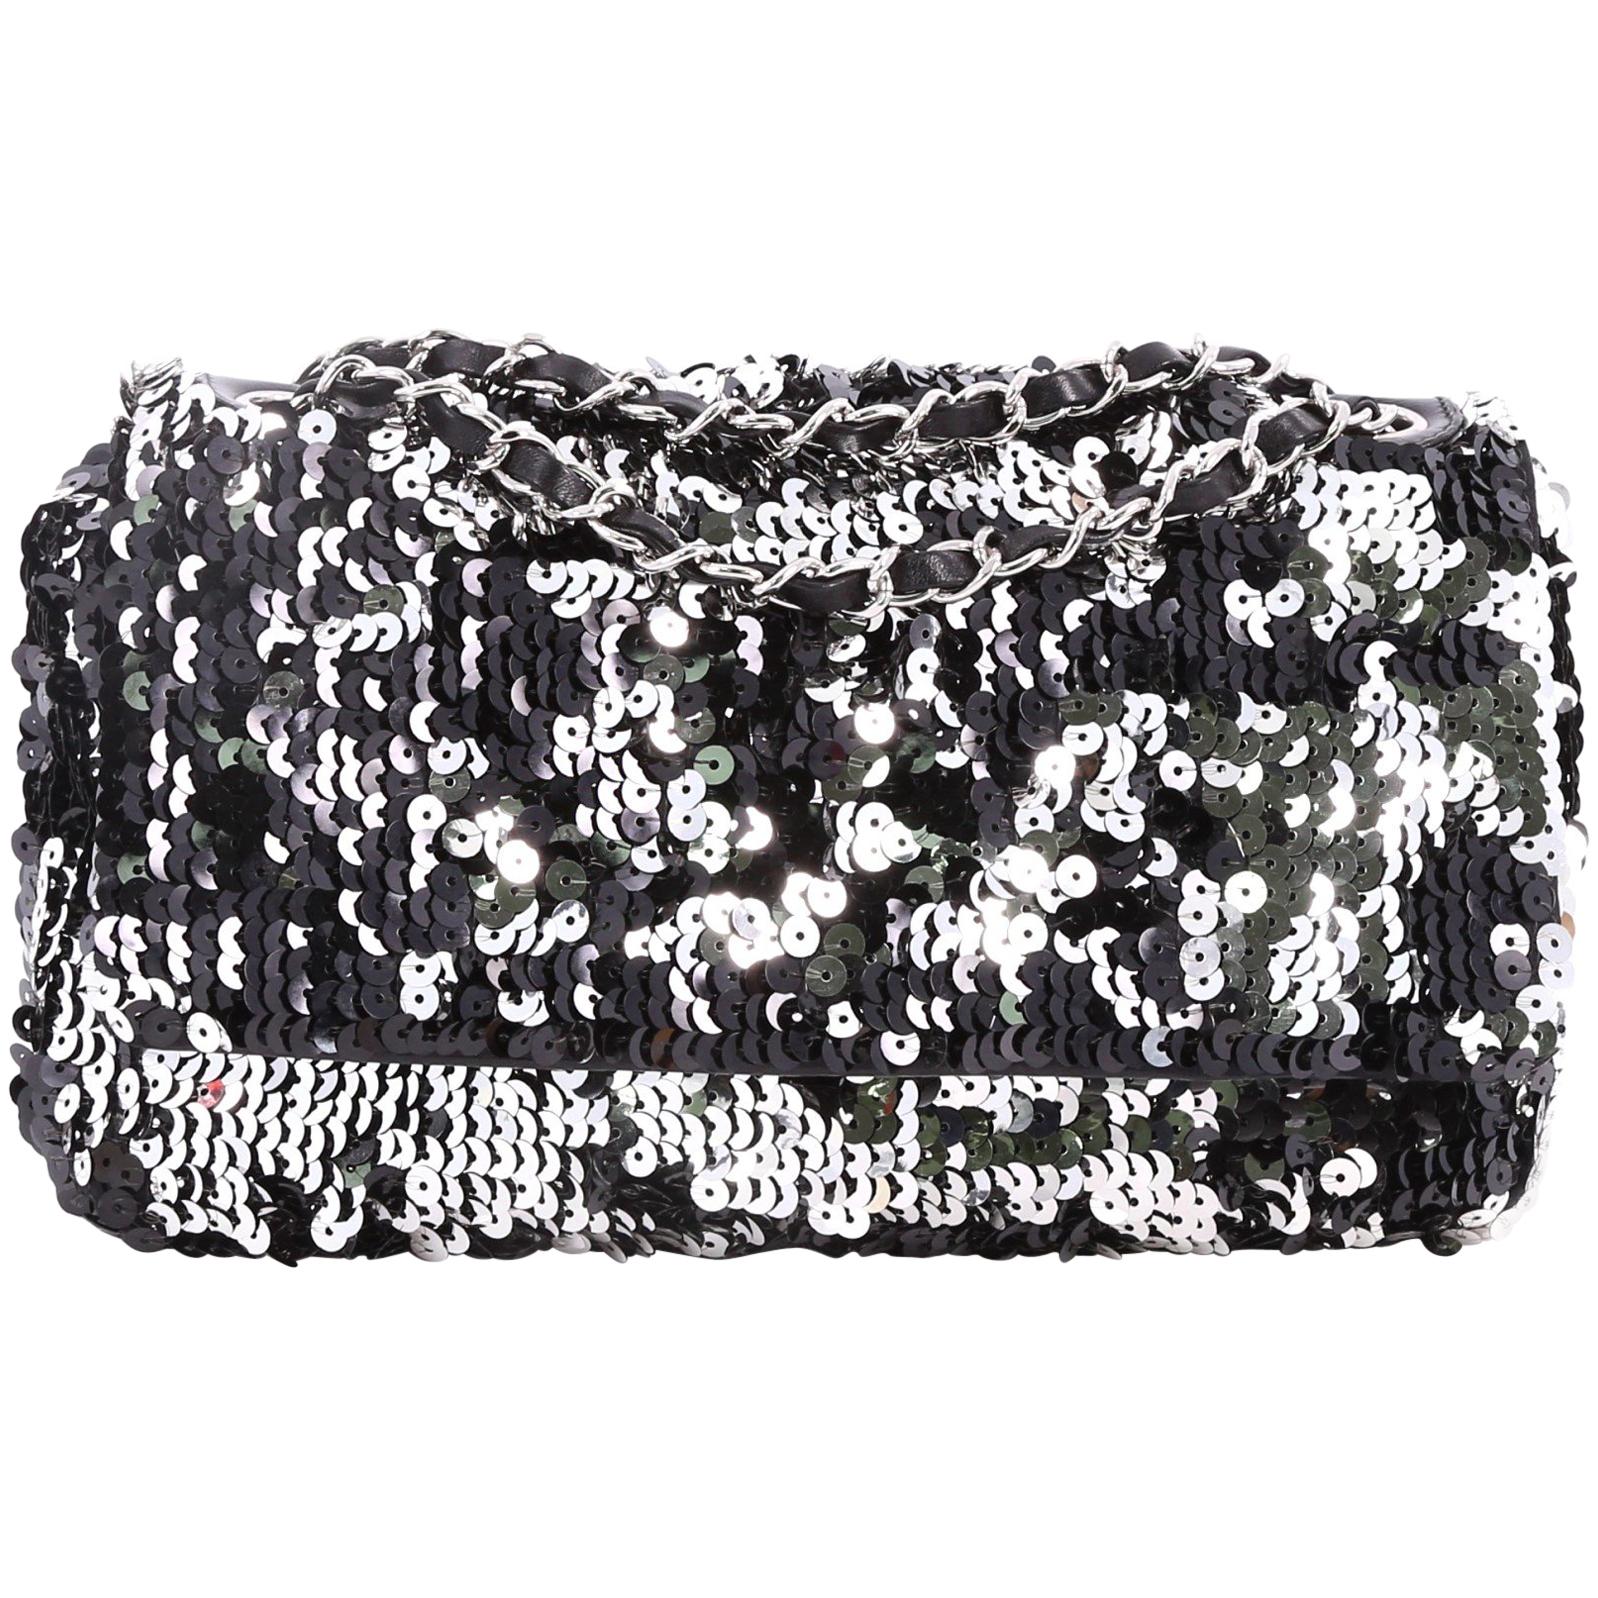 Chanel Summer Night Flap Bag Sequins with Leather Medium